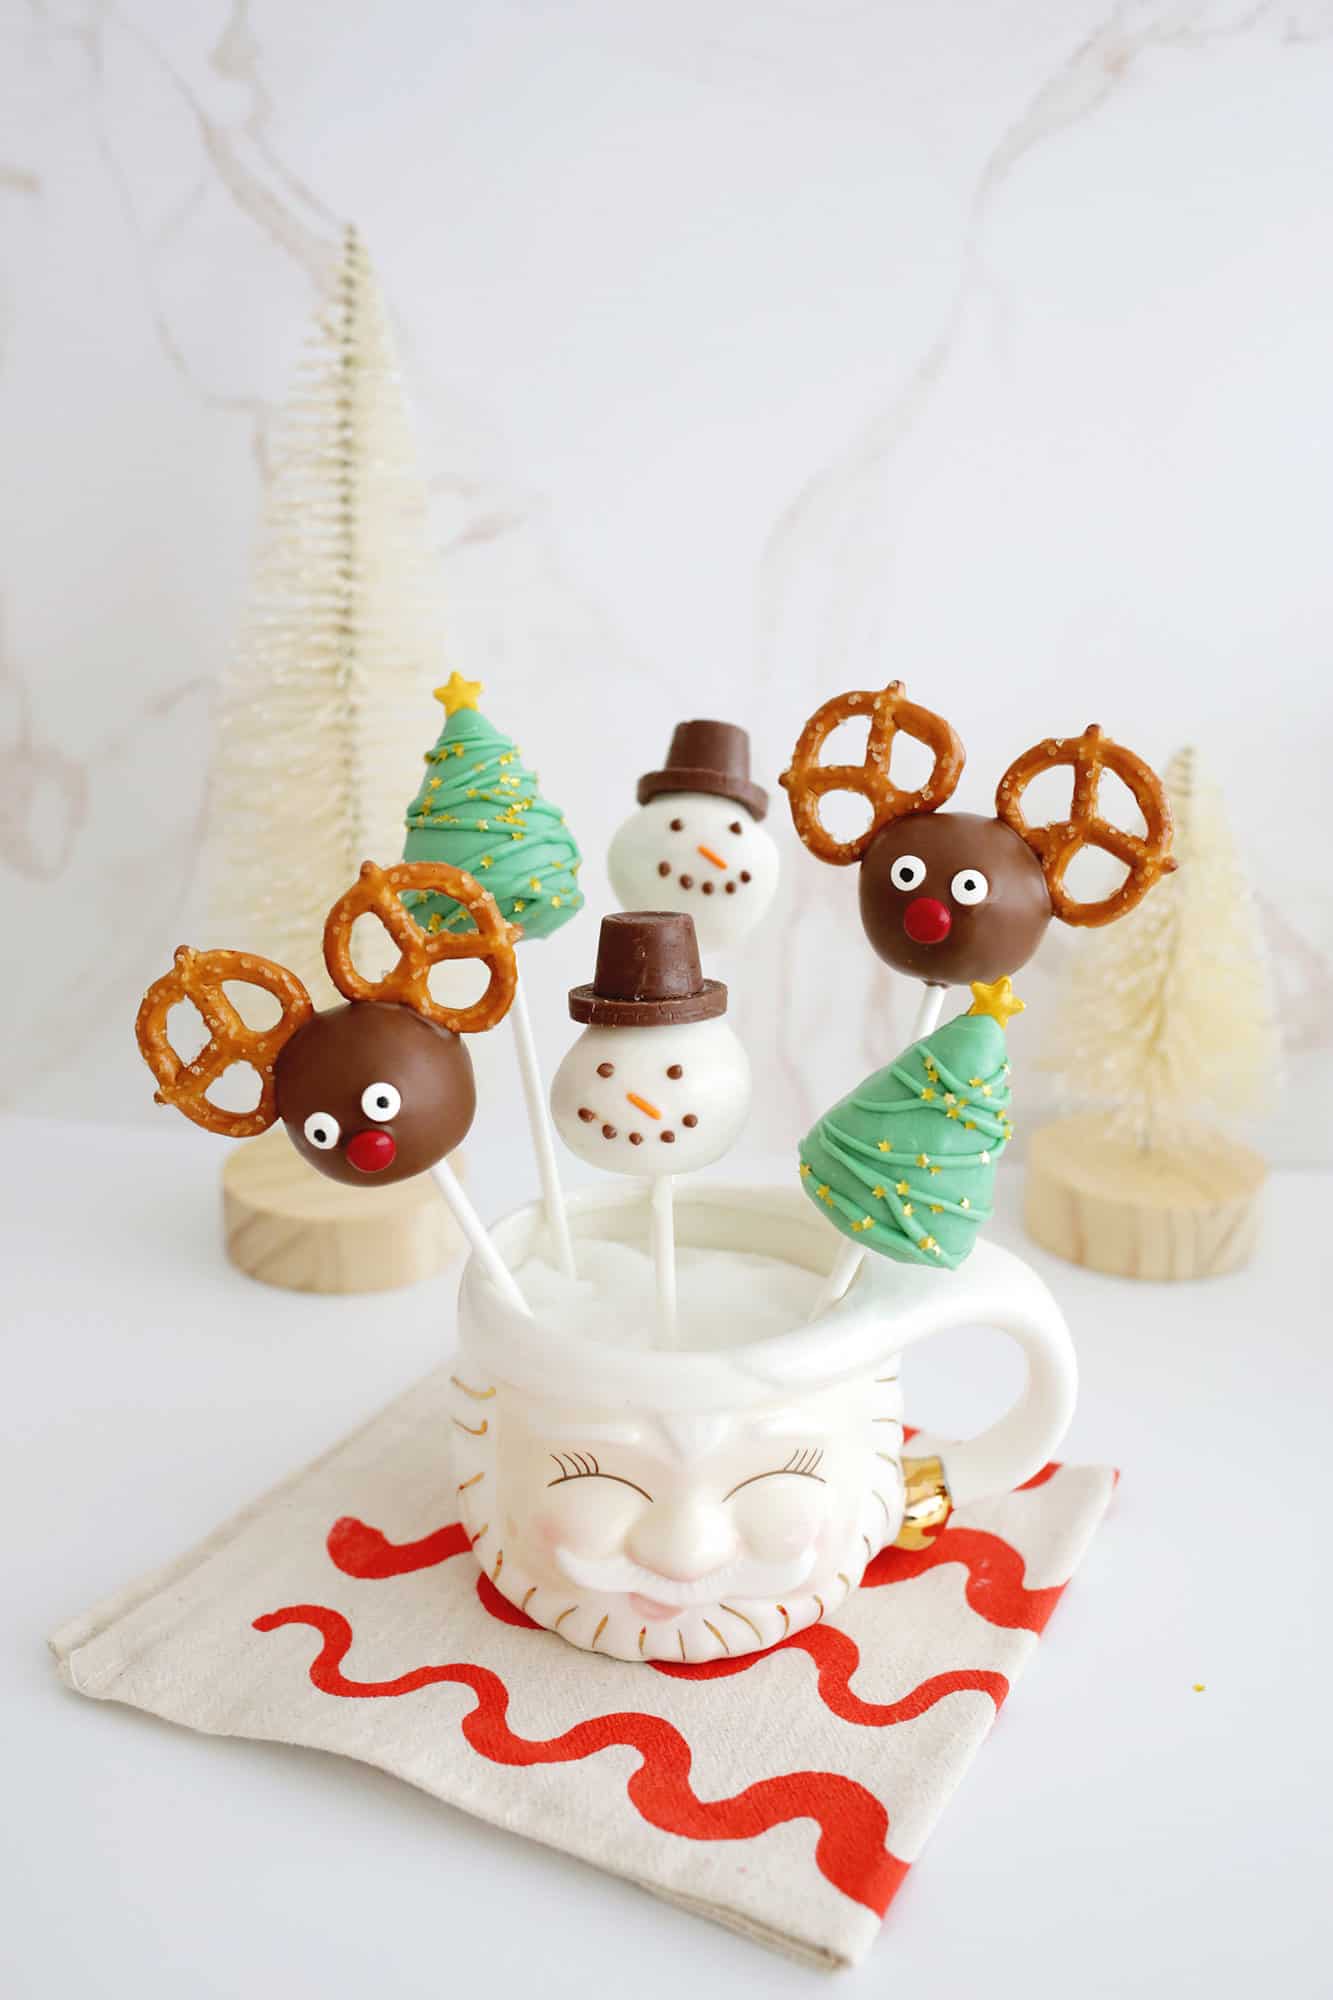 Christmas cake pops with reindeer, snowman, and Christmas tree